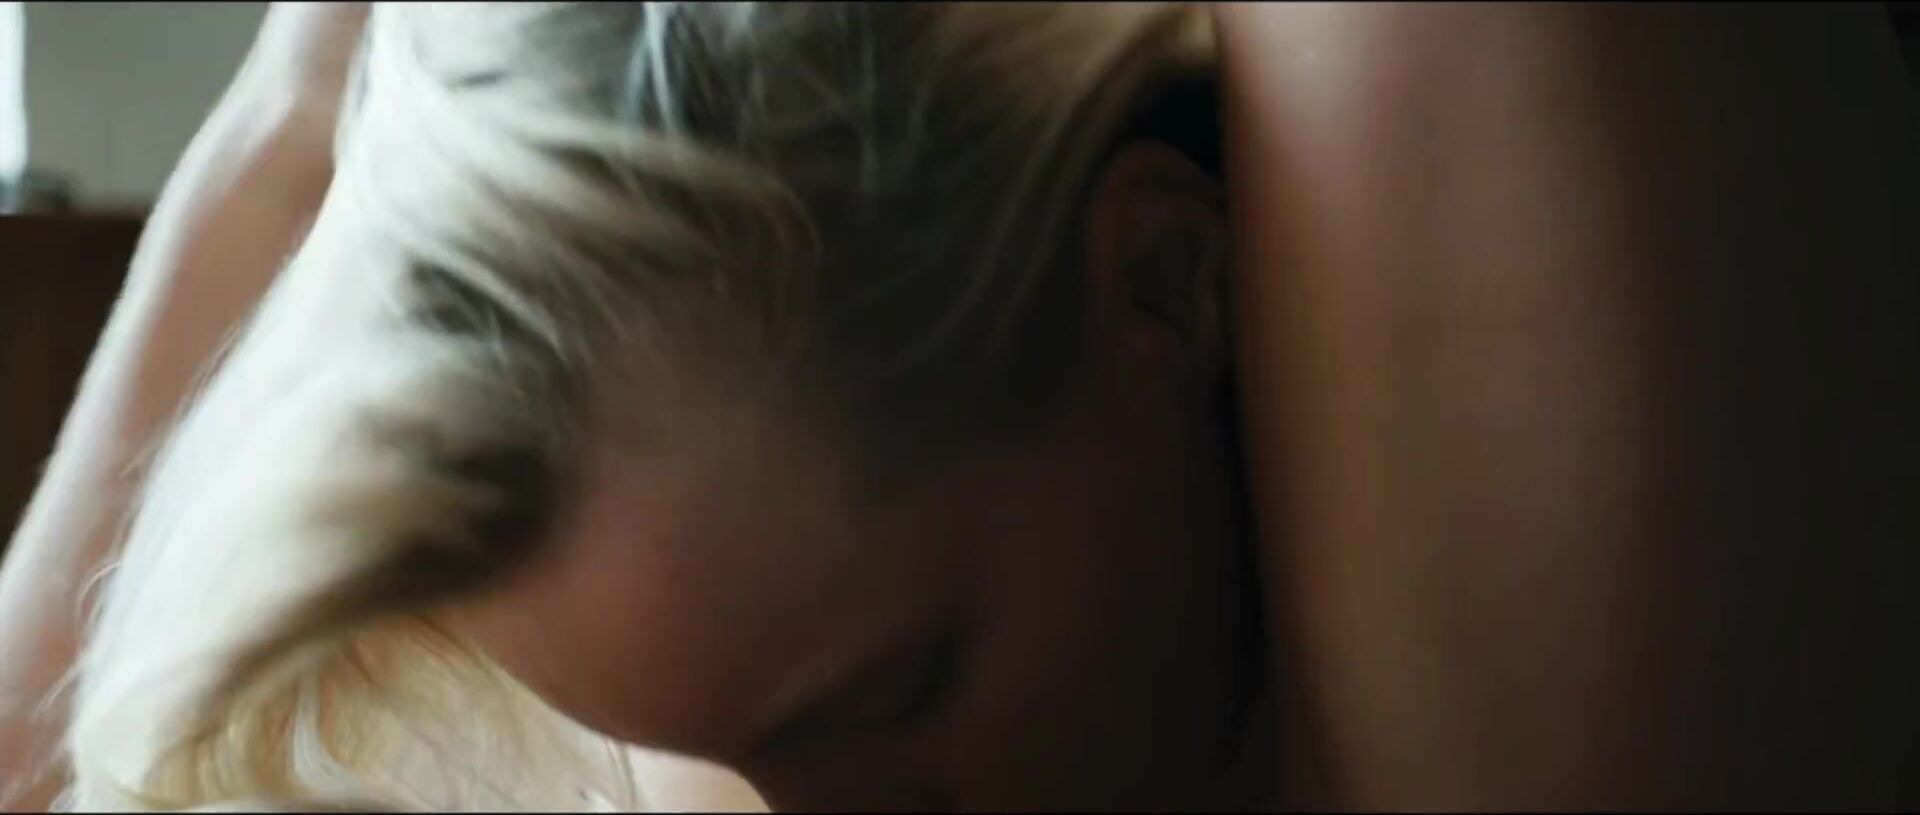 Taylor Vixen Below her Mouth contains carnal adventure moment of Erika Linder and her girlfriend Adult-Empire - 1